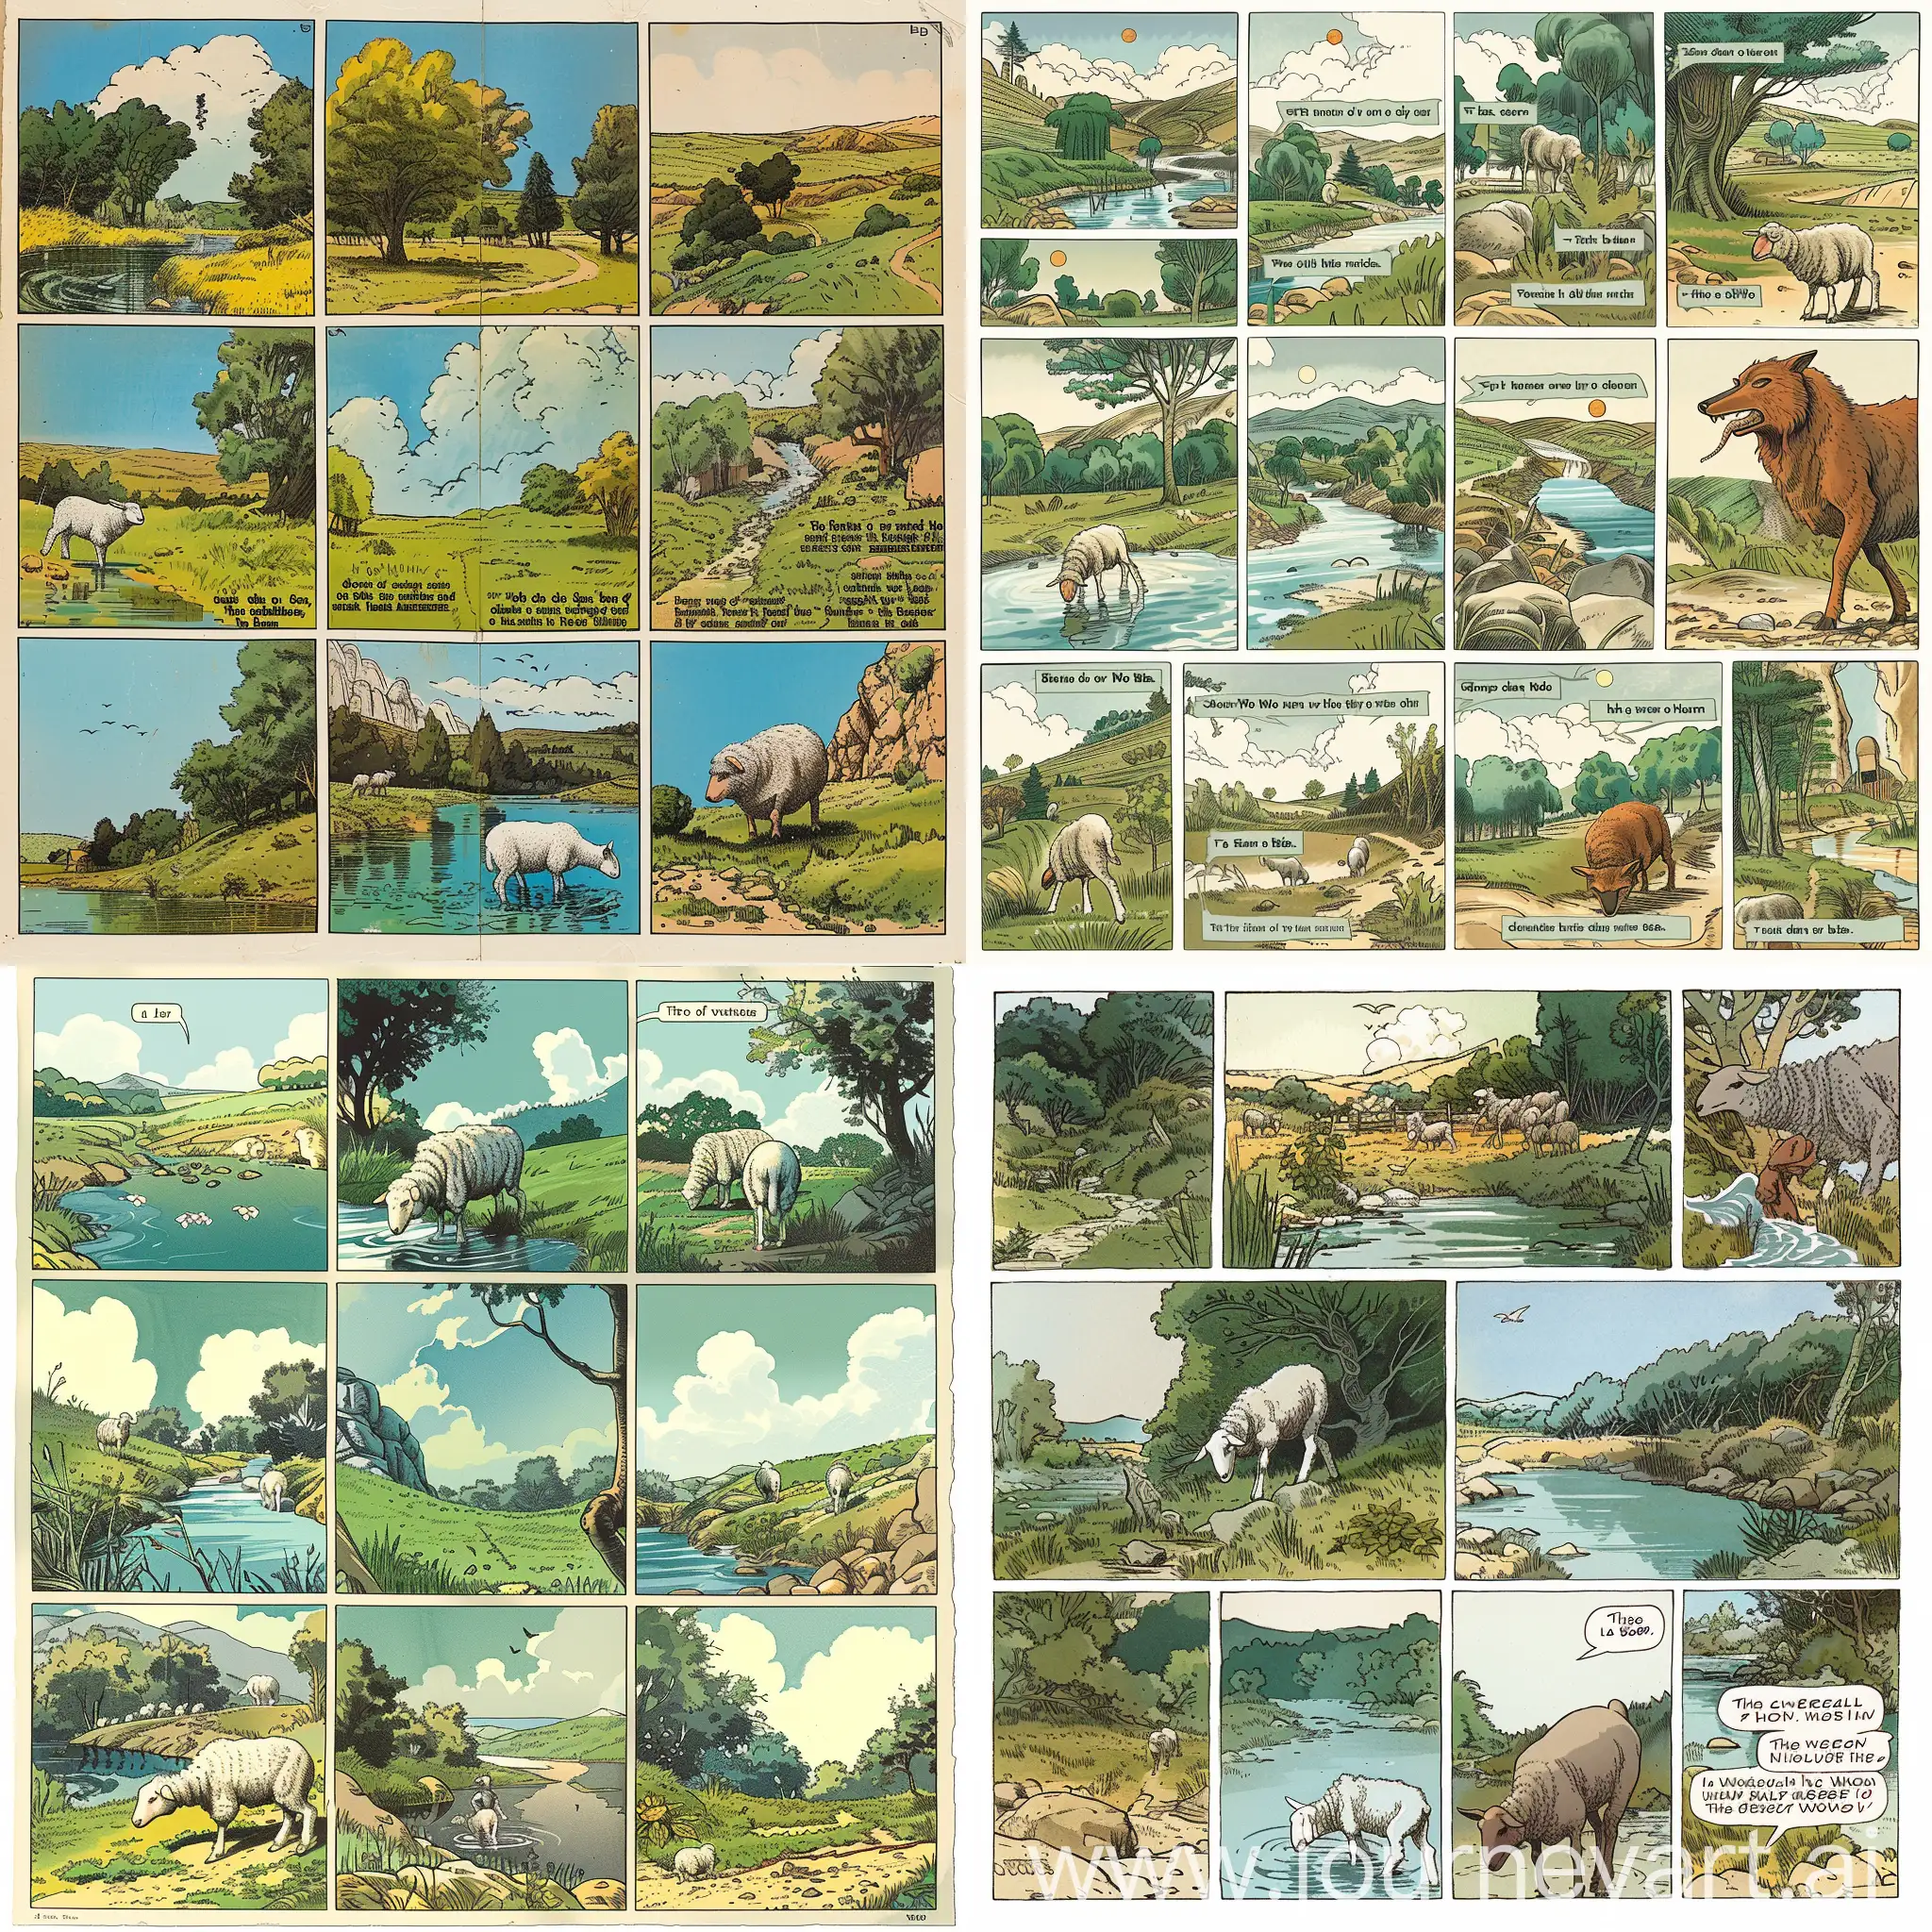 Create a comic strip in the style of Hergé, divided into rectangular or square scenes, telling the fable of La Fontaine, "The Wolf and the Lamb". Don't forget the descriptions outside the images.  The first scene shows a bucolic landscape with a clear stream where the lamb drinks peacefully.  The second scene shows the arrival of the wolf, menacing and imposing, accusing the lamb of disturbing his water.  The third scene shows the lamb trying to defend himself by explaining that he drinks downstream.  The fourth scene reveals the wolf finding new accusations, determined to devour the lamb.  The fifth scene shows the wolf carrying away the lamb.  The final scene presents the moral of the fable: "The reason of the strongest is always the best."  Each scene should be detailed and captivating, with descriptions outside the images.